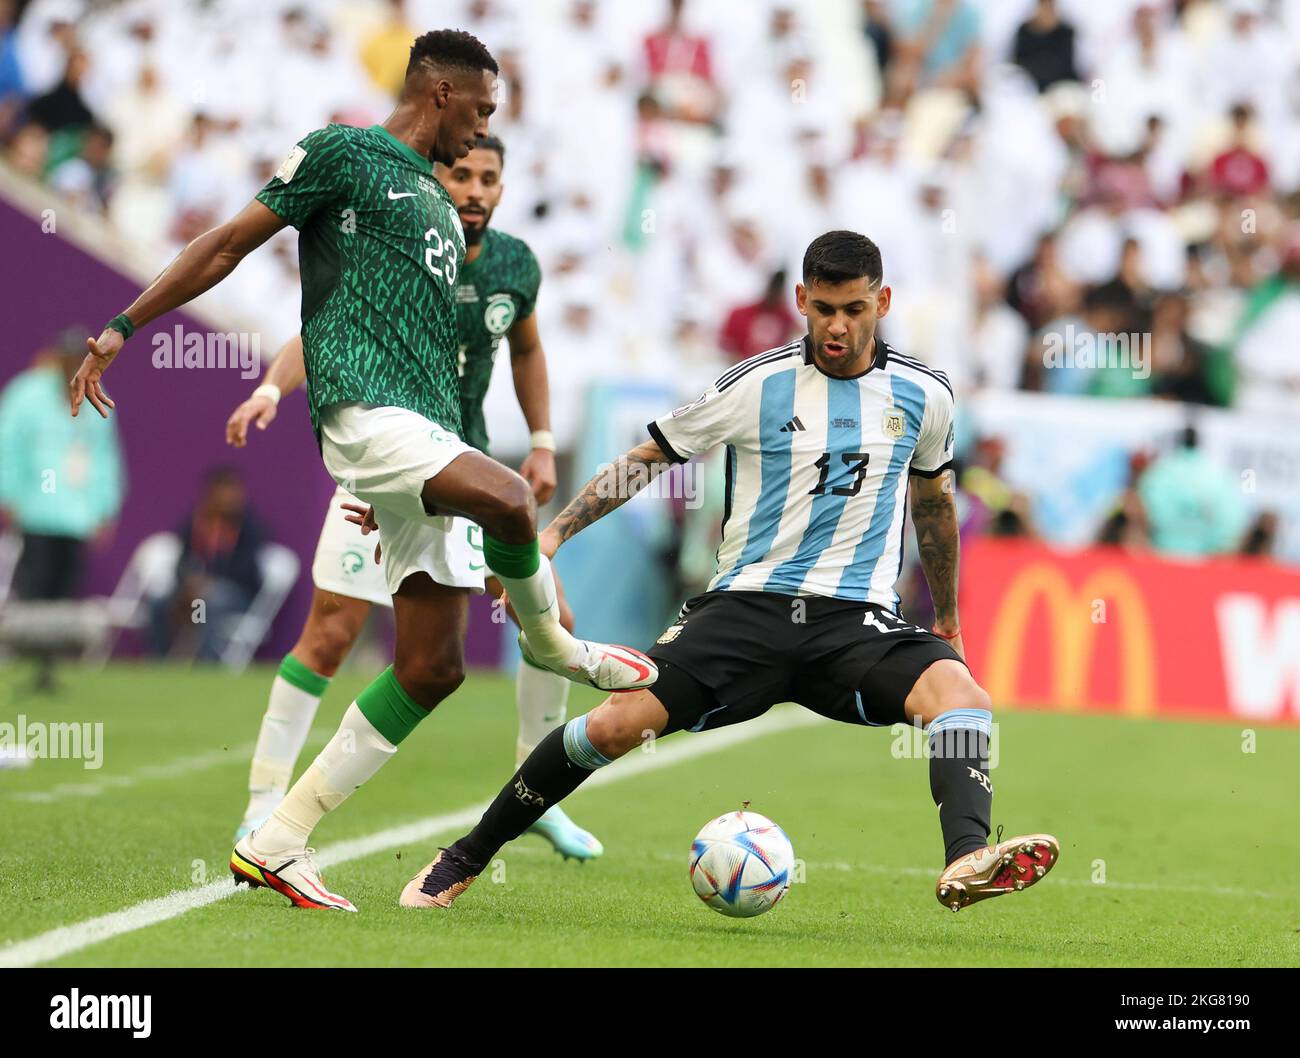 Lusail, Qatar. 22nd Nov, 2022. Mohamed Kanno (L) of Saudi Arabia vies with Cristian Romero (R) of Argentina during the Group C match between Argentina and Saudi Arabia at the 2022 FIFA World Cup at Lusail Stadium in Lusail, Qatar, Nov. 22, 2022. Credit: Han Yan/Xinhua/Alamy Live News Stock Photo